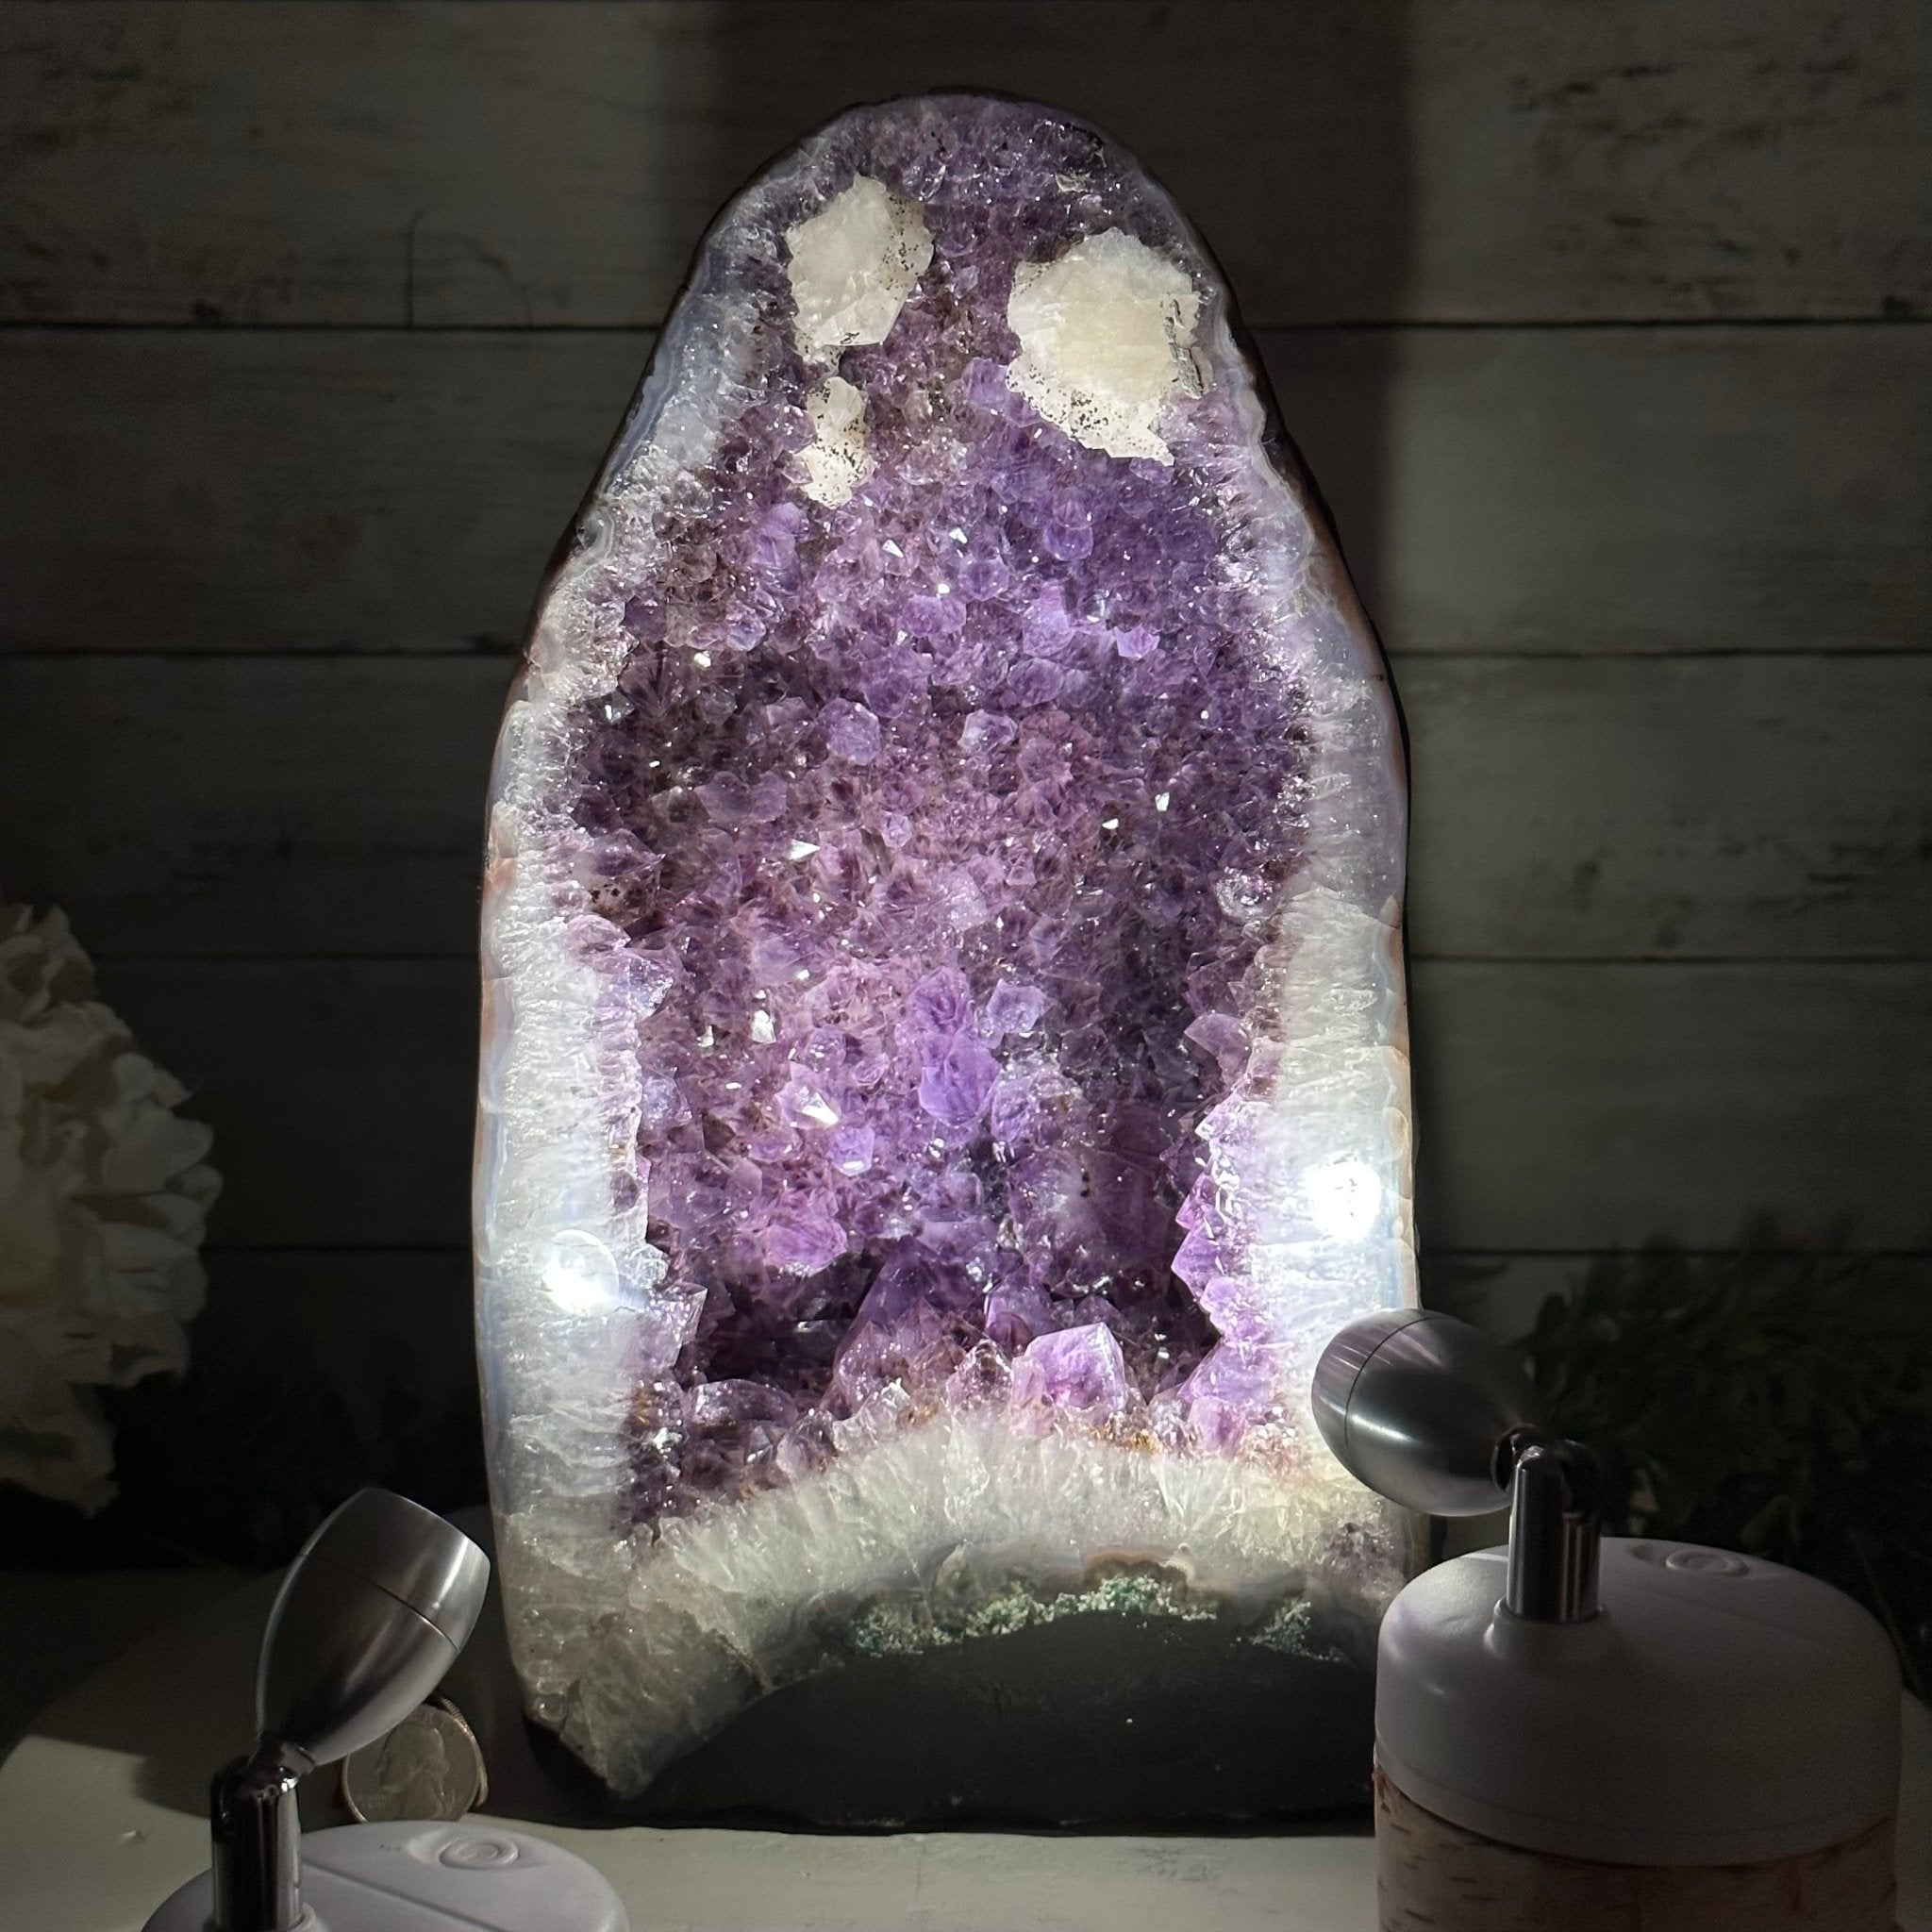 Extra Plus Quality Brazilian Amethyst Cathedral, 16 lbs & 11.8" Tall, Model #5601-0969 by Brazil Gems - Brazil GemsBrazil GemsExtra Plus Quality Brazilian Amethyst Cathedral, 16 lbs & 11.8" Tall, Model #5601-0969 by Brazil GemsCathedrals5601-0969